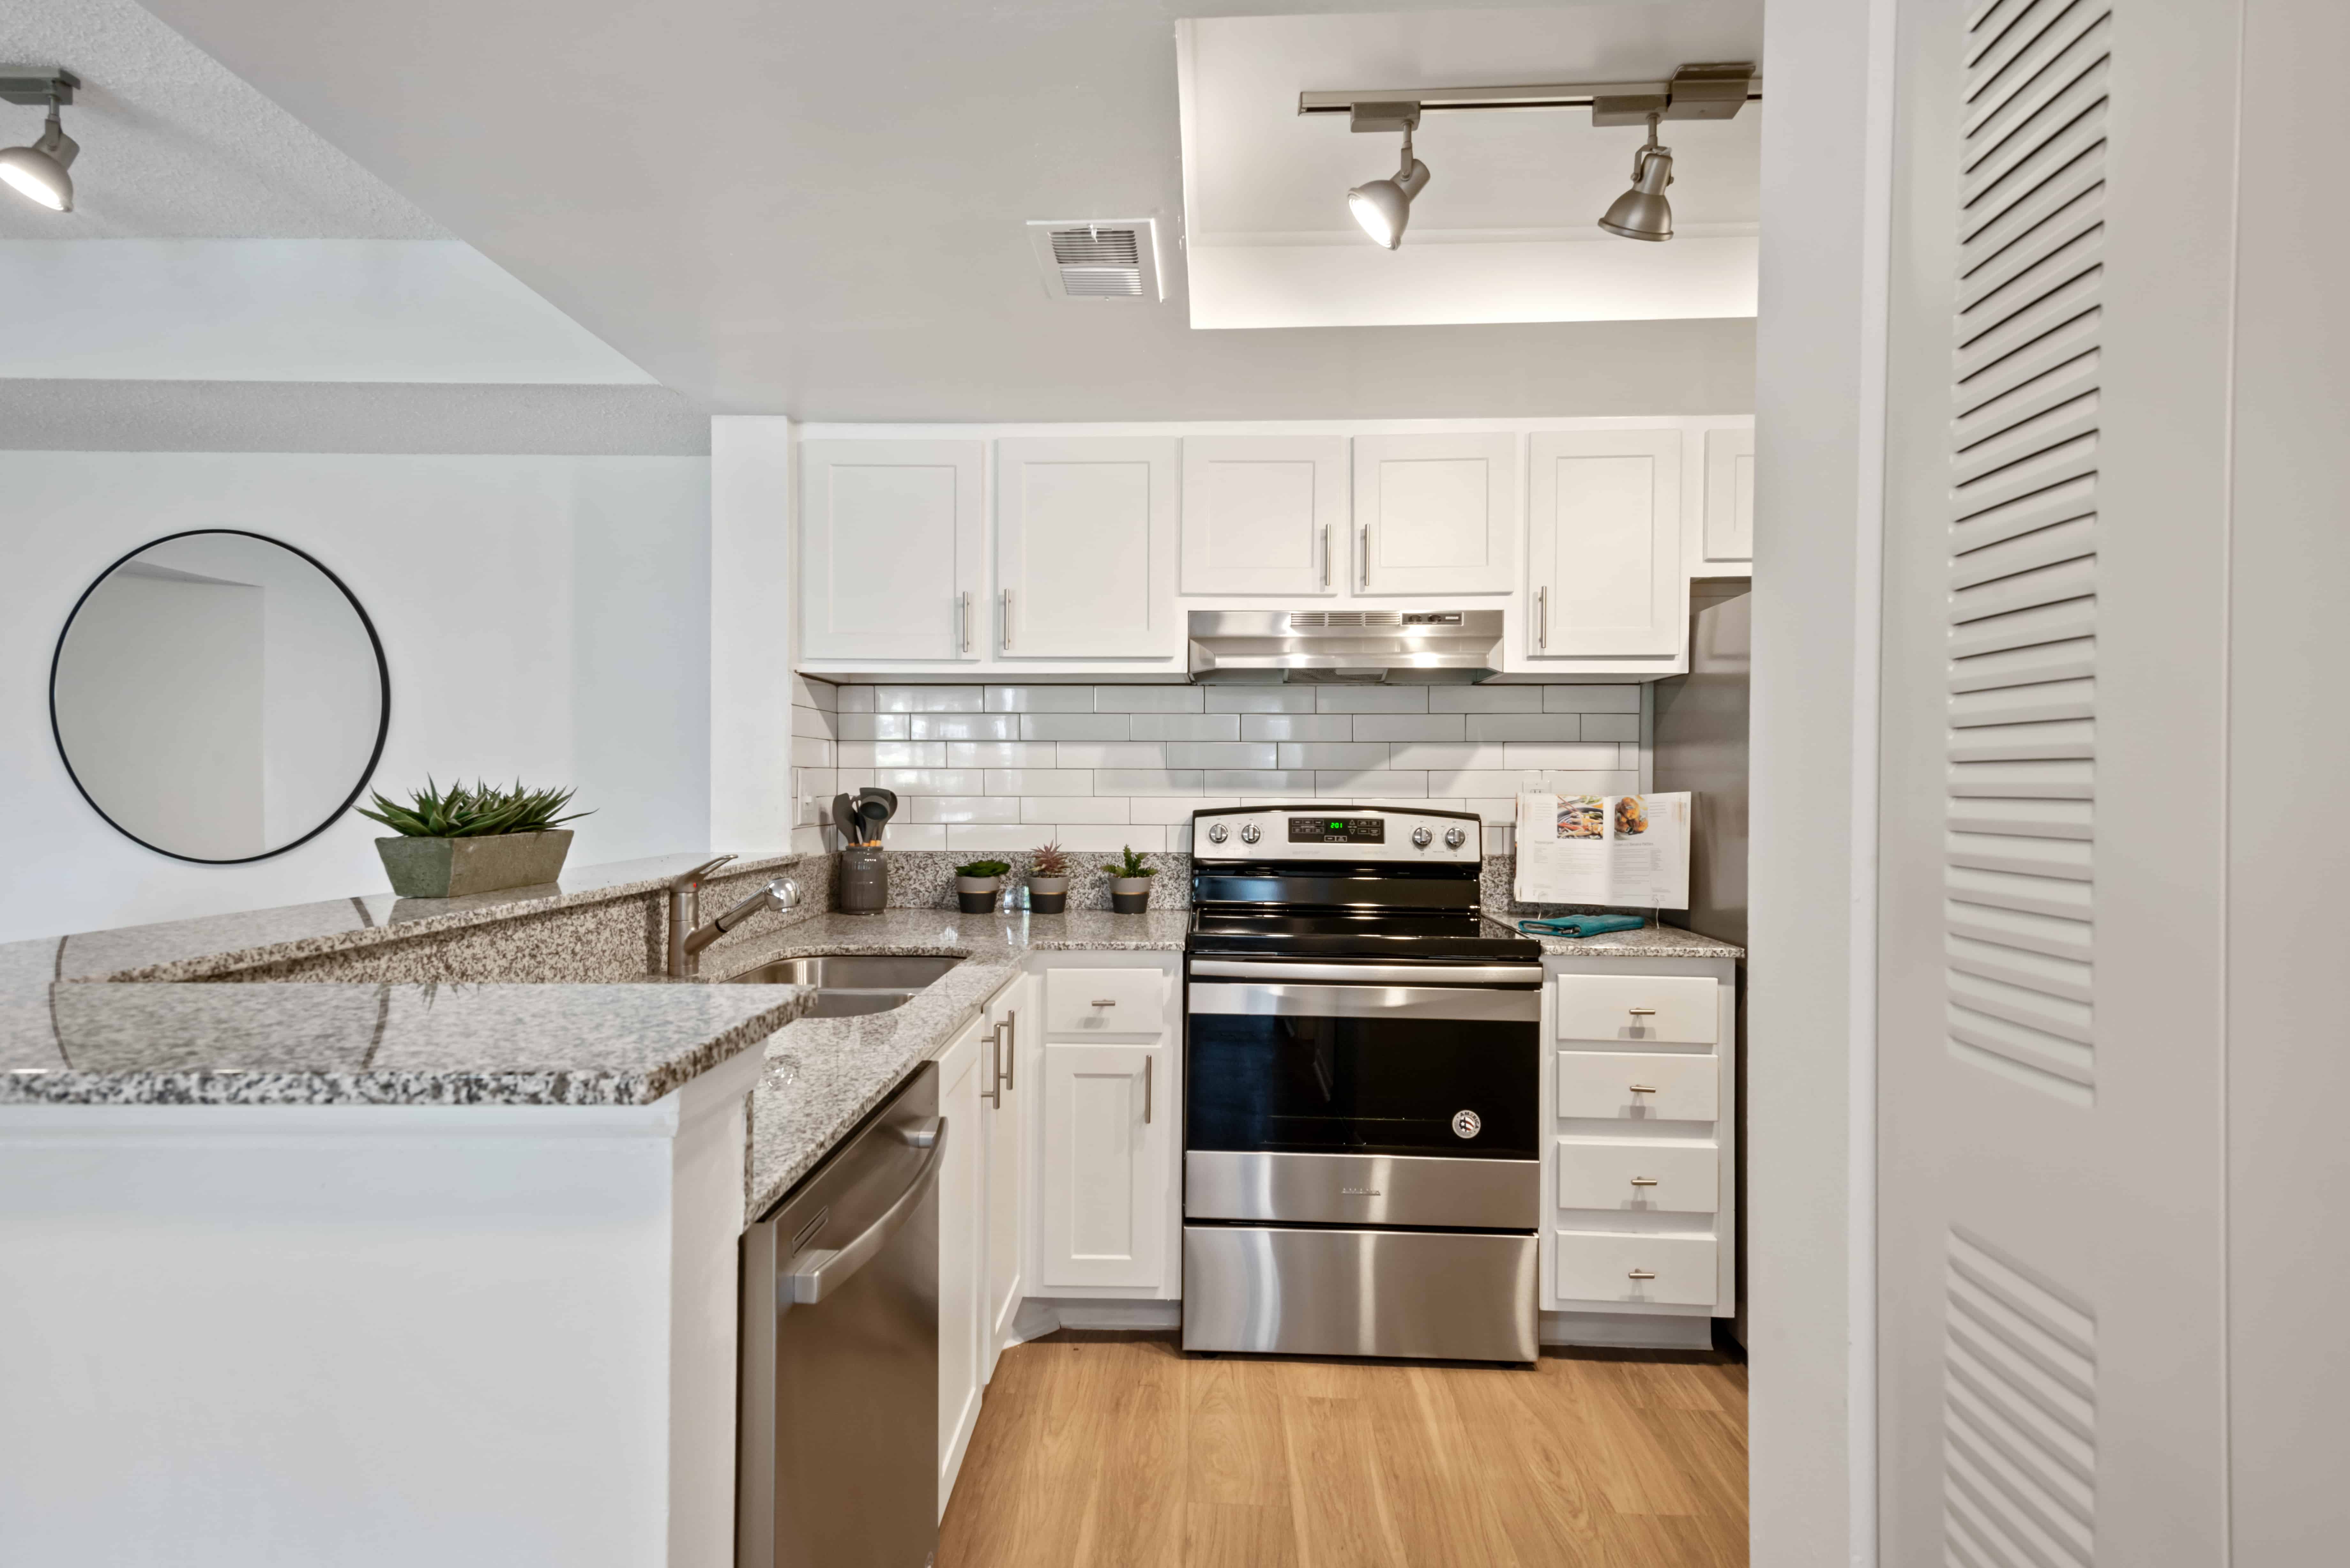 Open kitchen with stainless appliances , white cabinets and grey and black speckled granite countertop